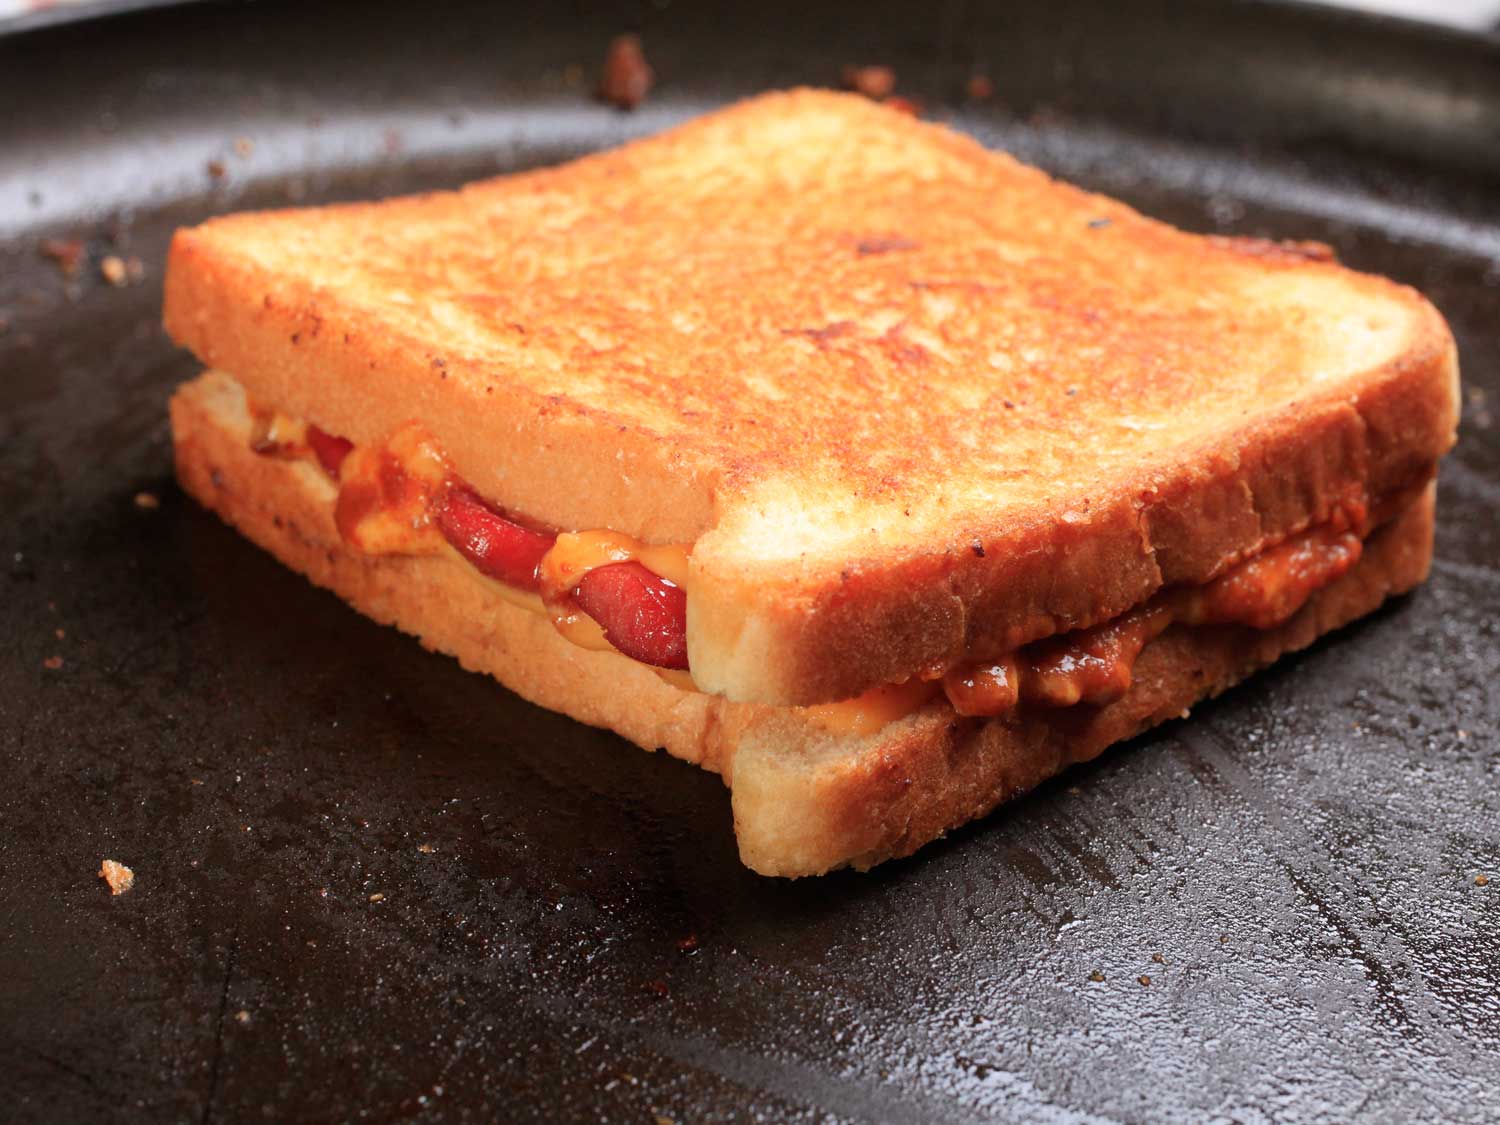 Chili Cheese Hot Dog Grilled Cheese